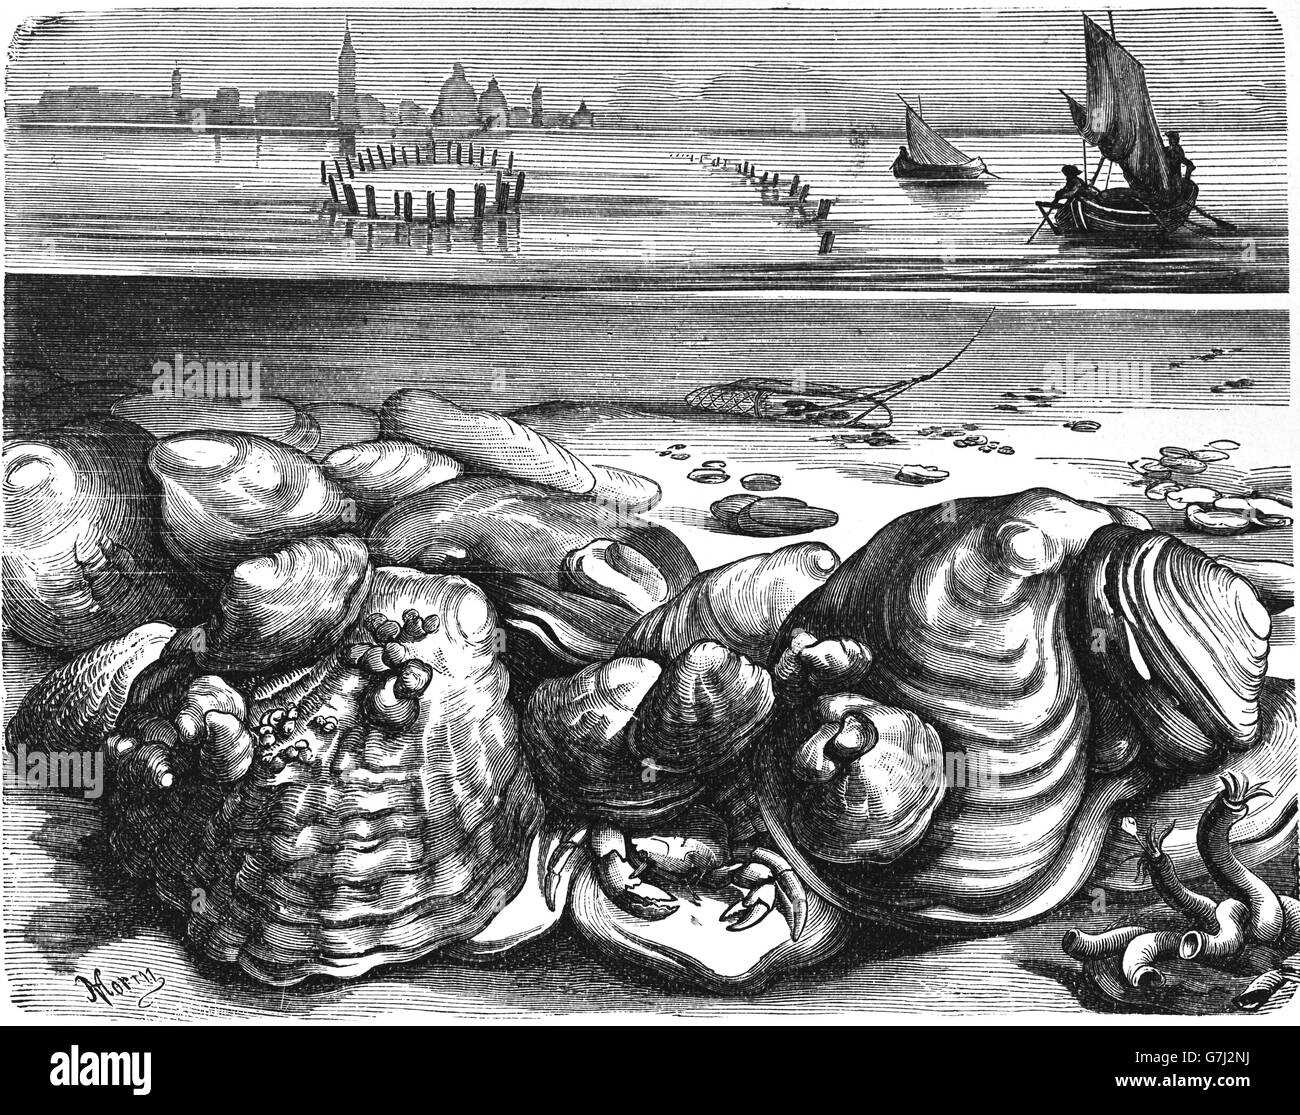 Oyster culture at Mediterranean sea, illustration from book dated 1904 Stock Photo